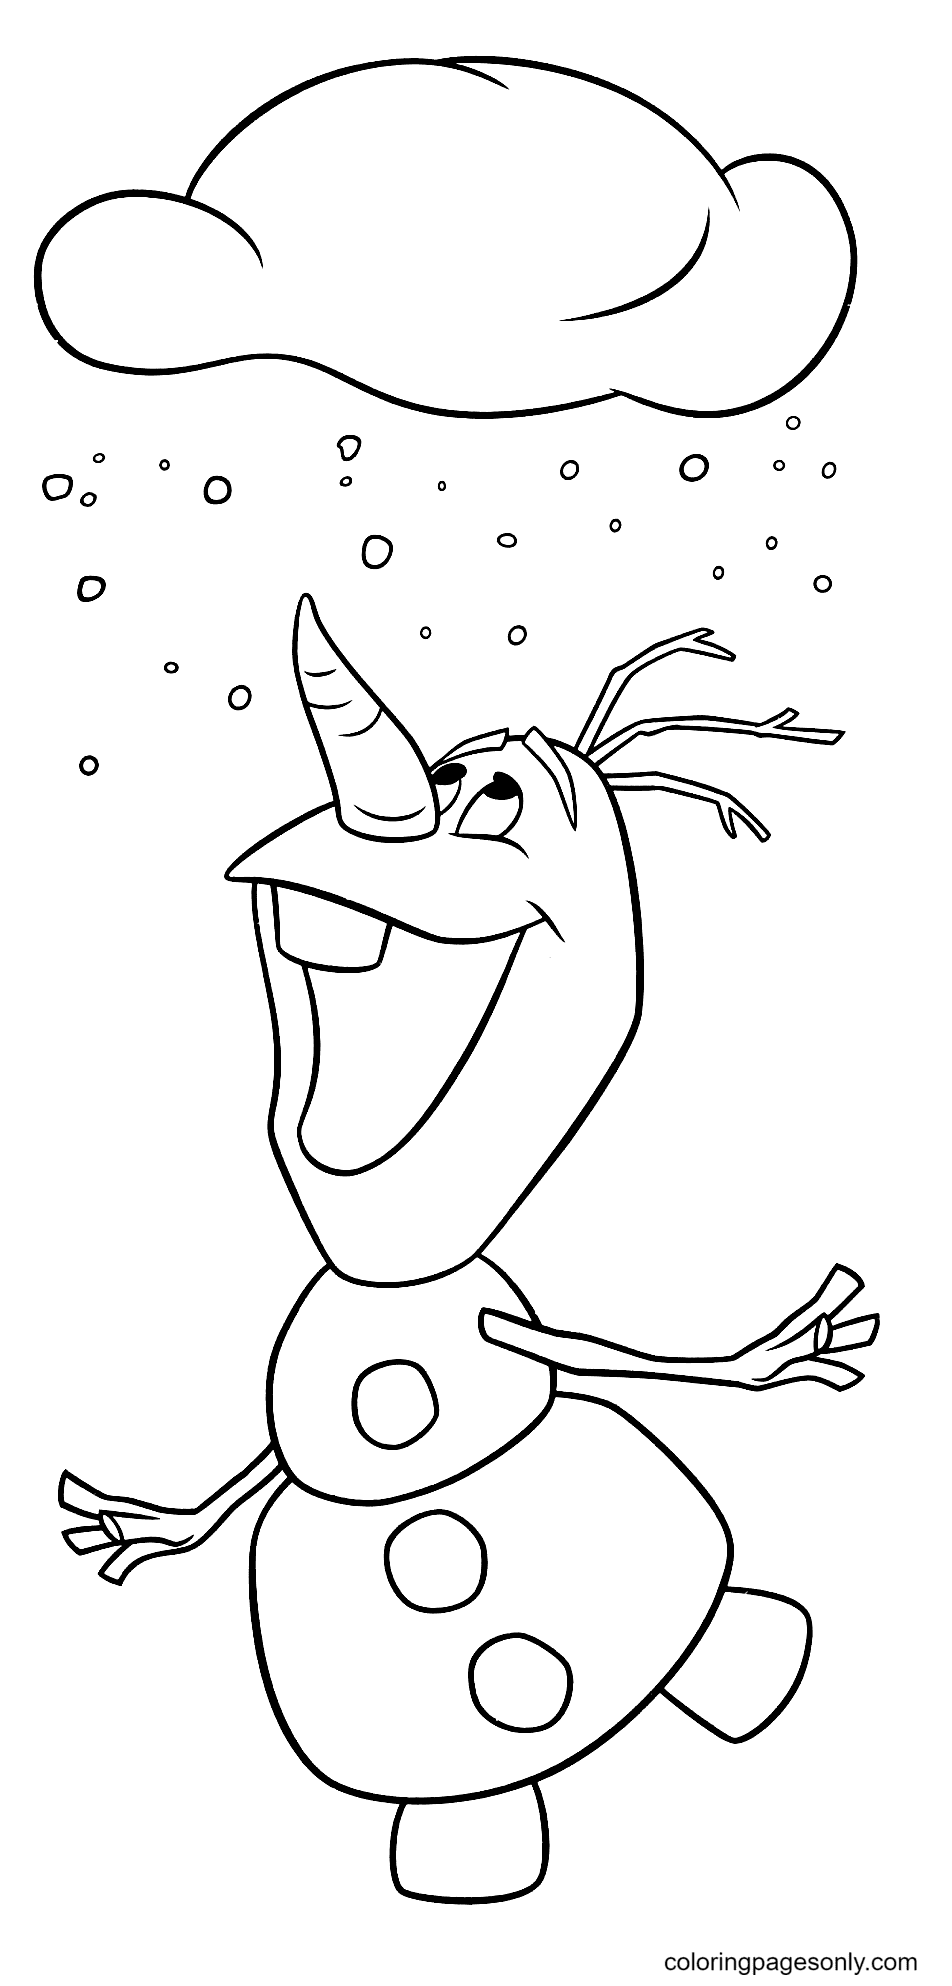 Cute Frozen Olaf Coloring Page